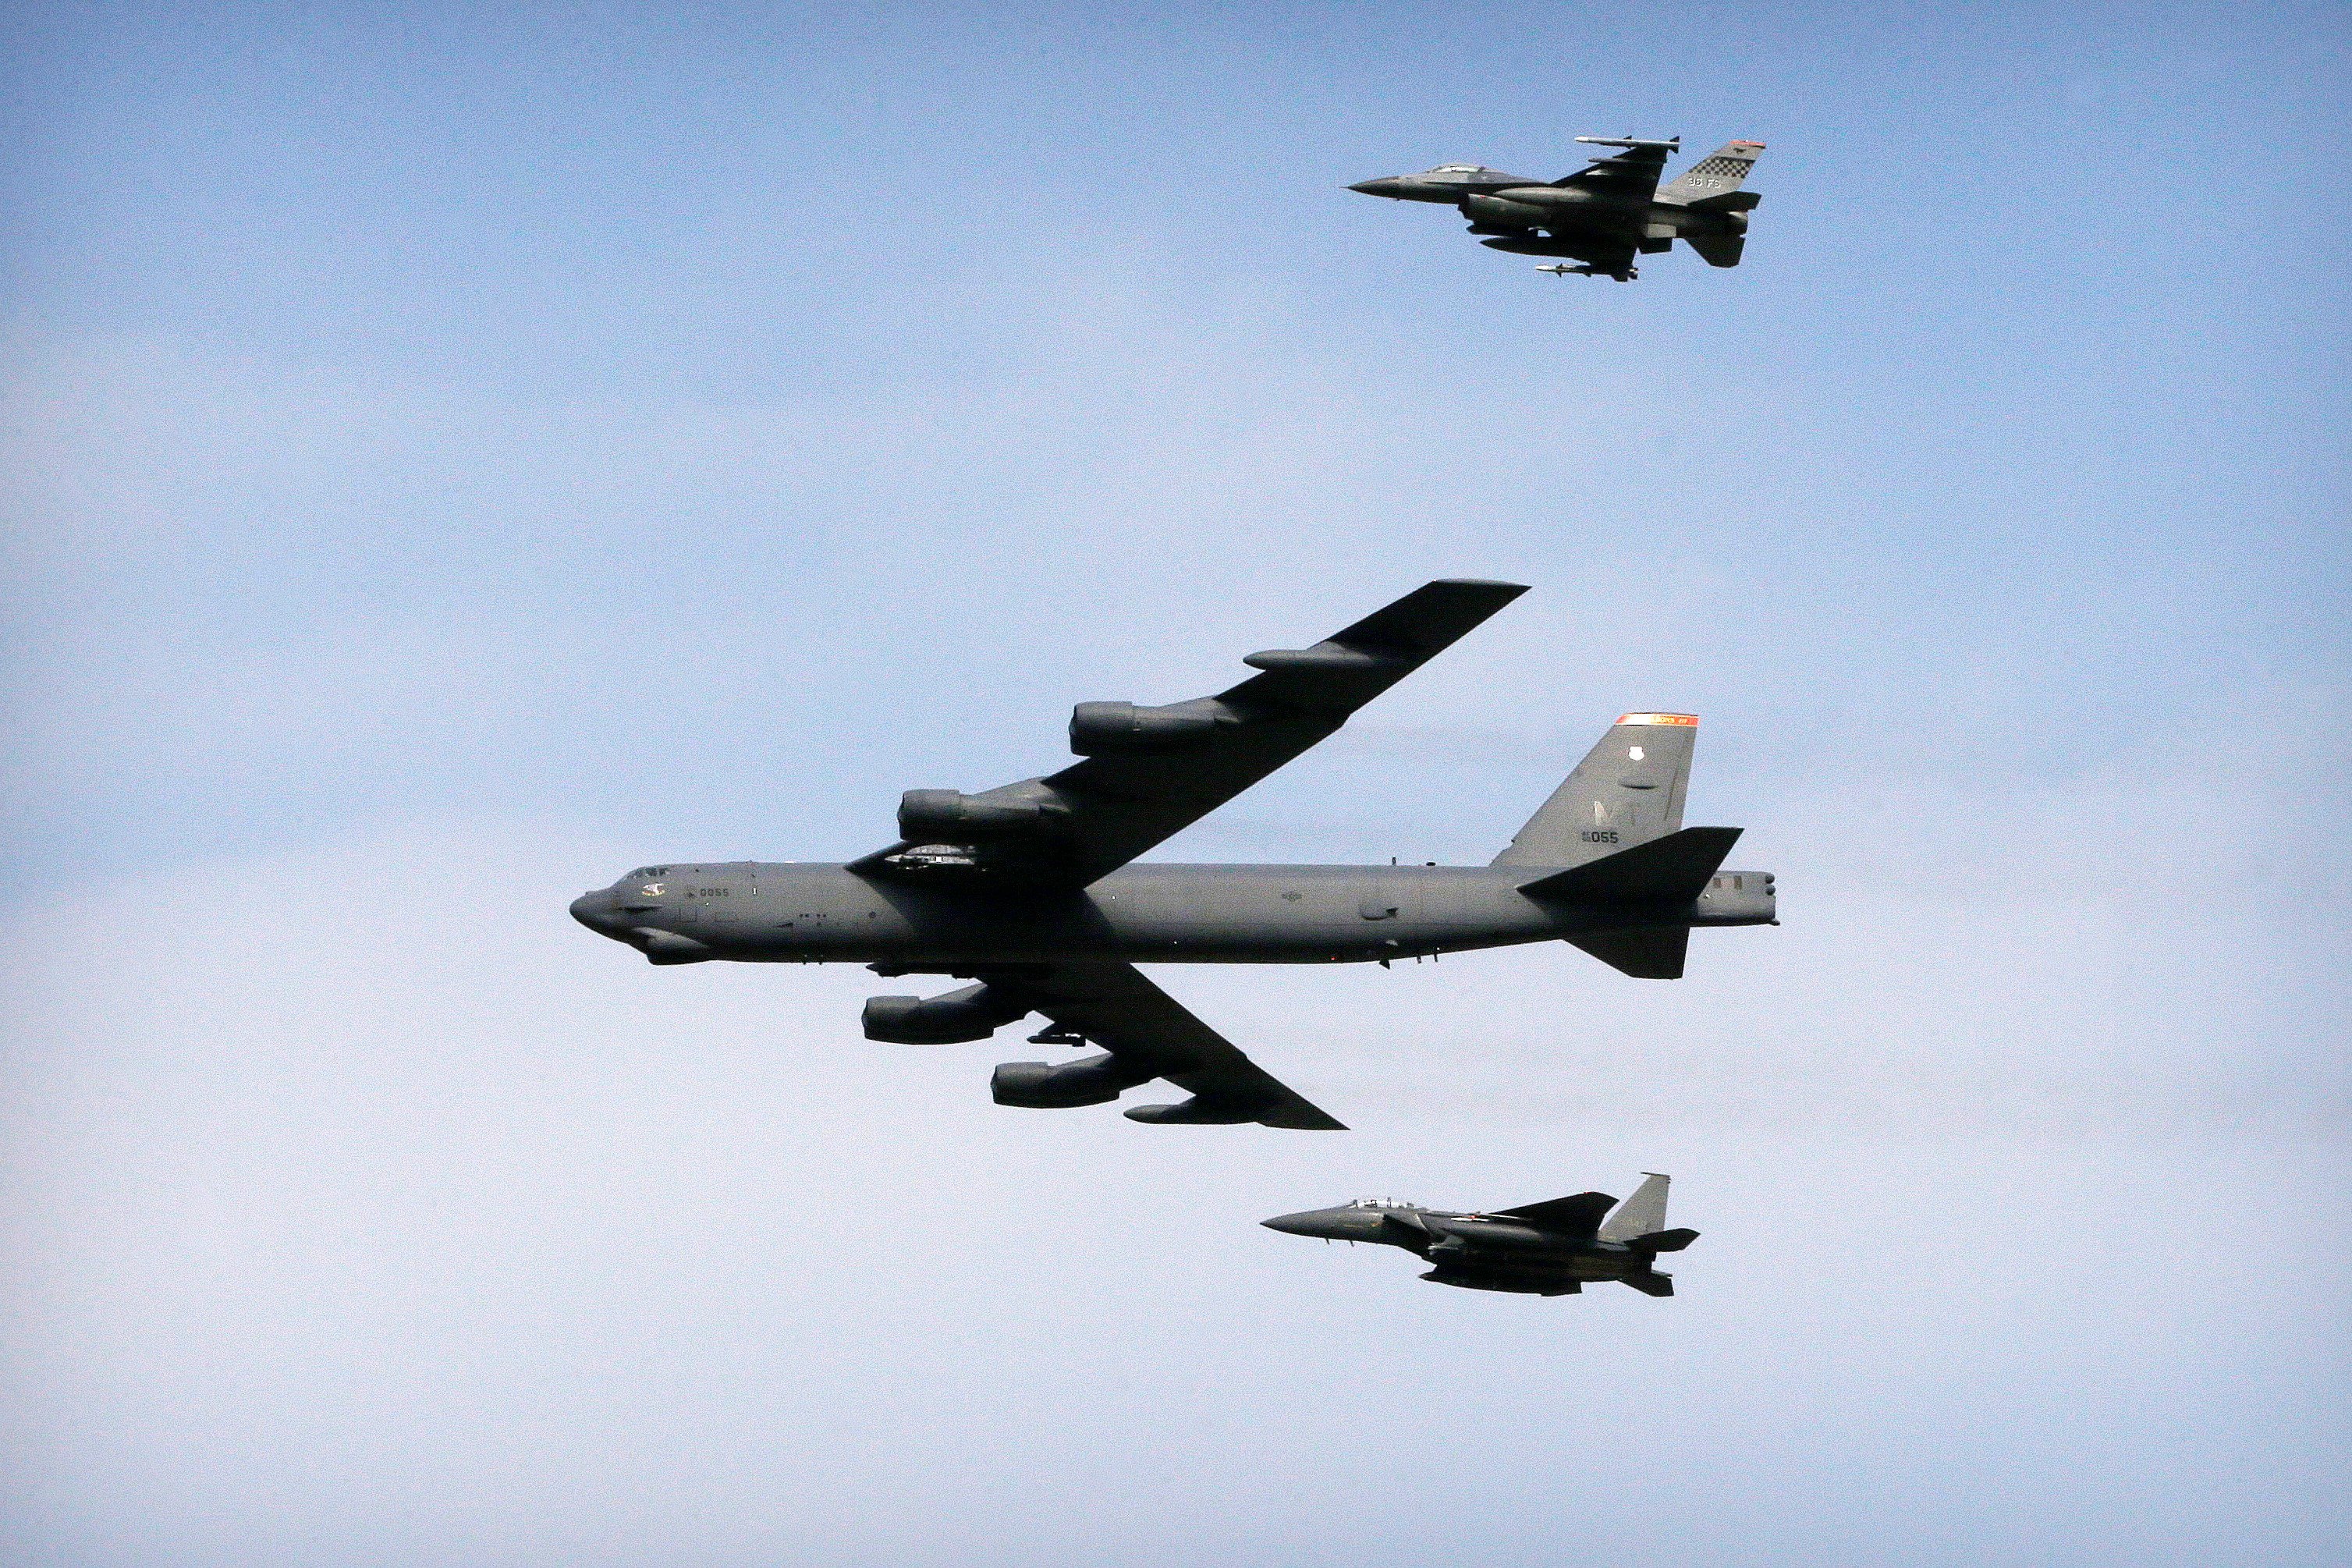 A US Air Force B-52 bomber flies over Osan Air Base in Pyeongtaek, South Korea. The United States is preparing to deploy up to six nuclear-capable B-52 bombers in northern Australia, according to an Australian news report. Photo: AP